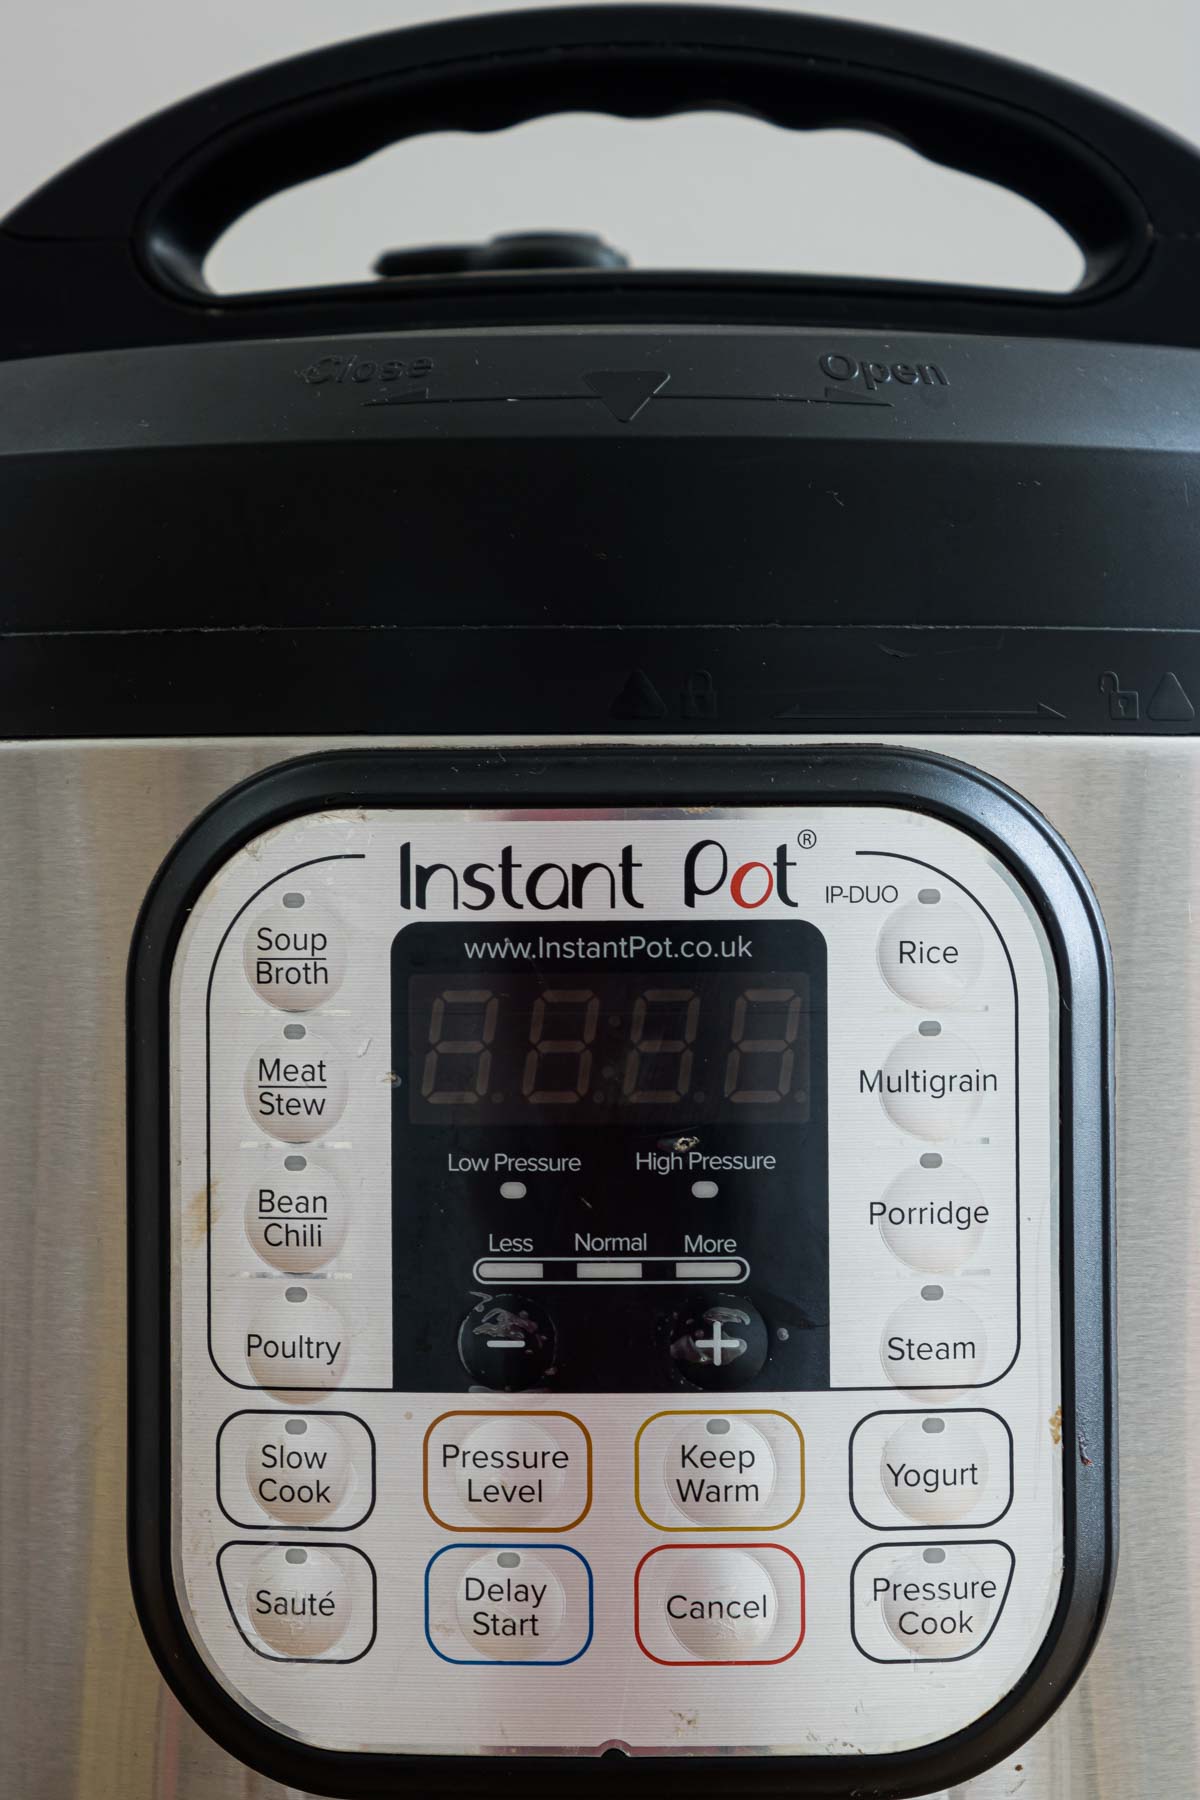 the front panel of the instant pot